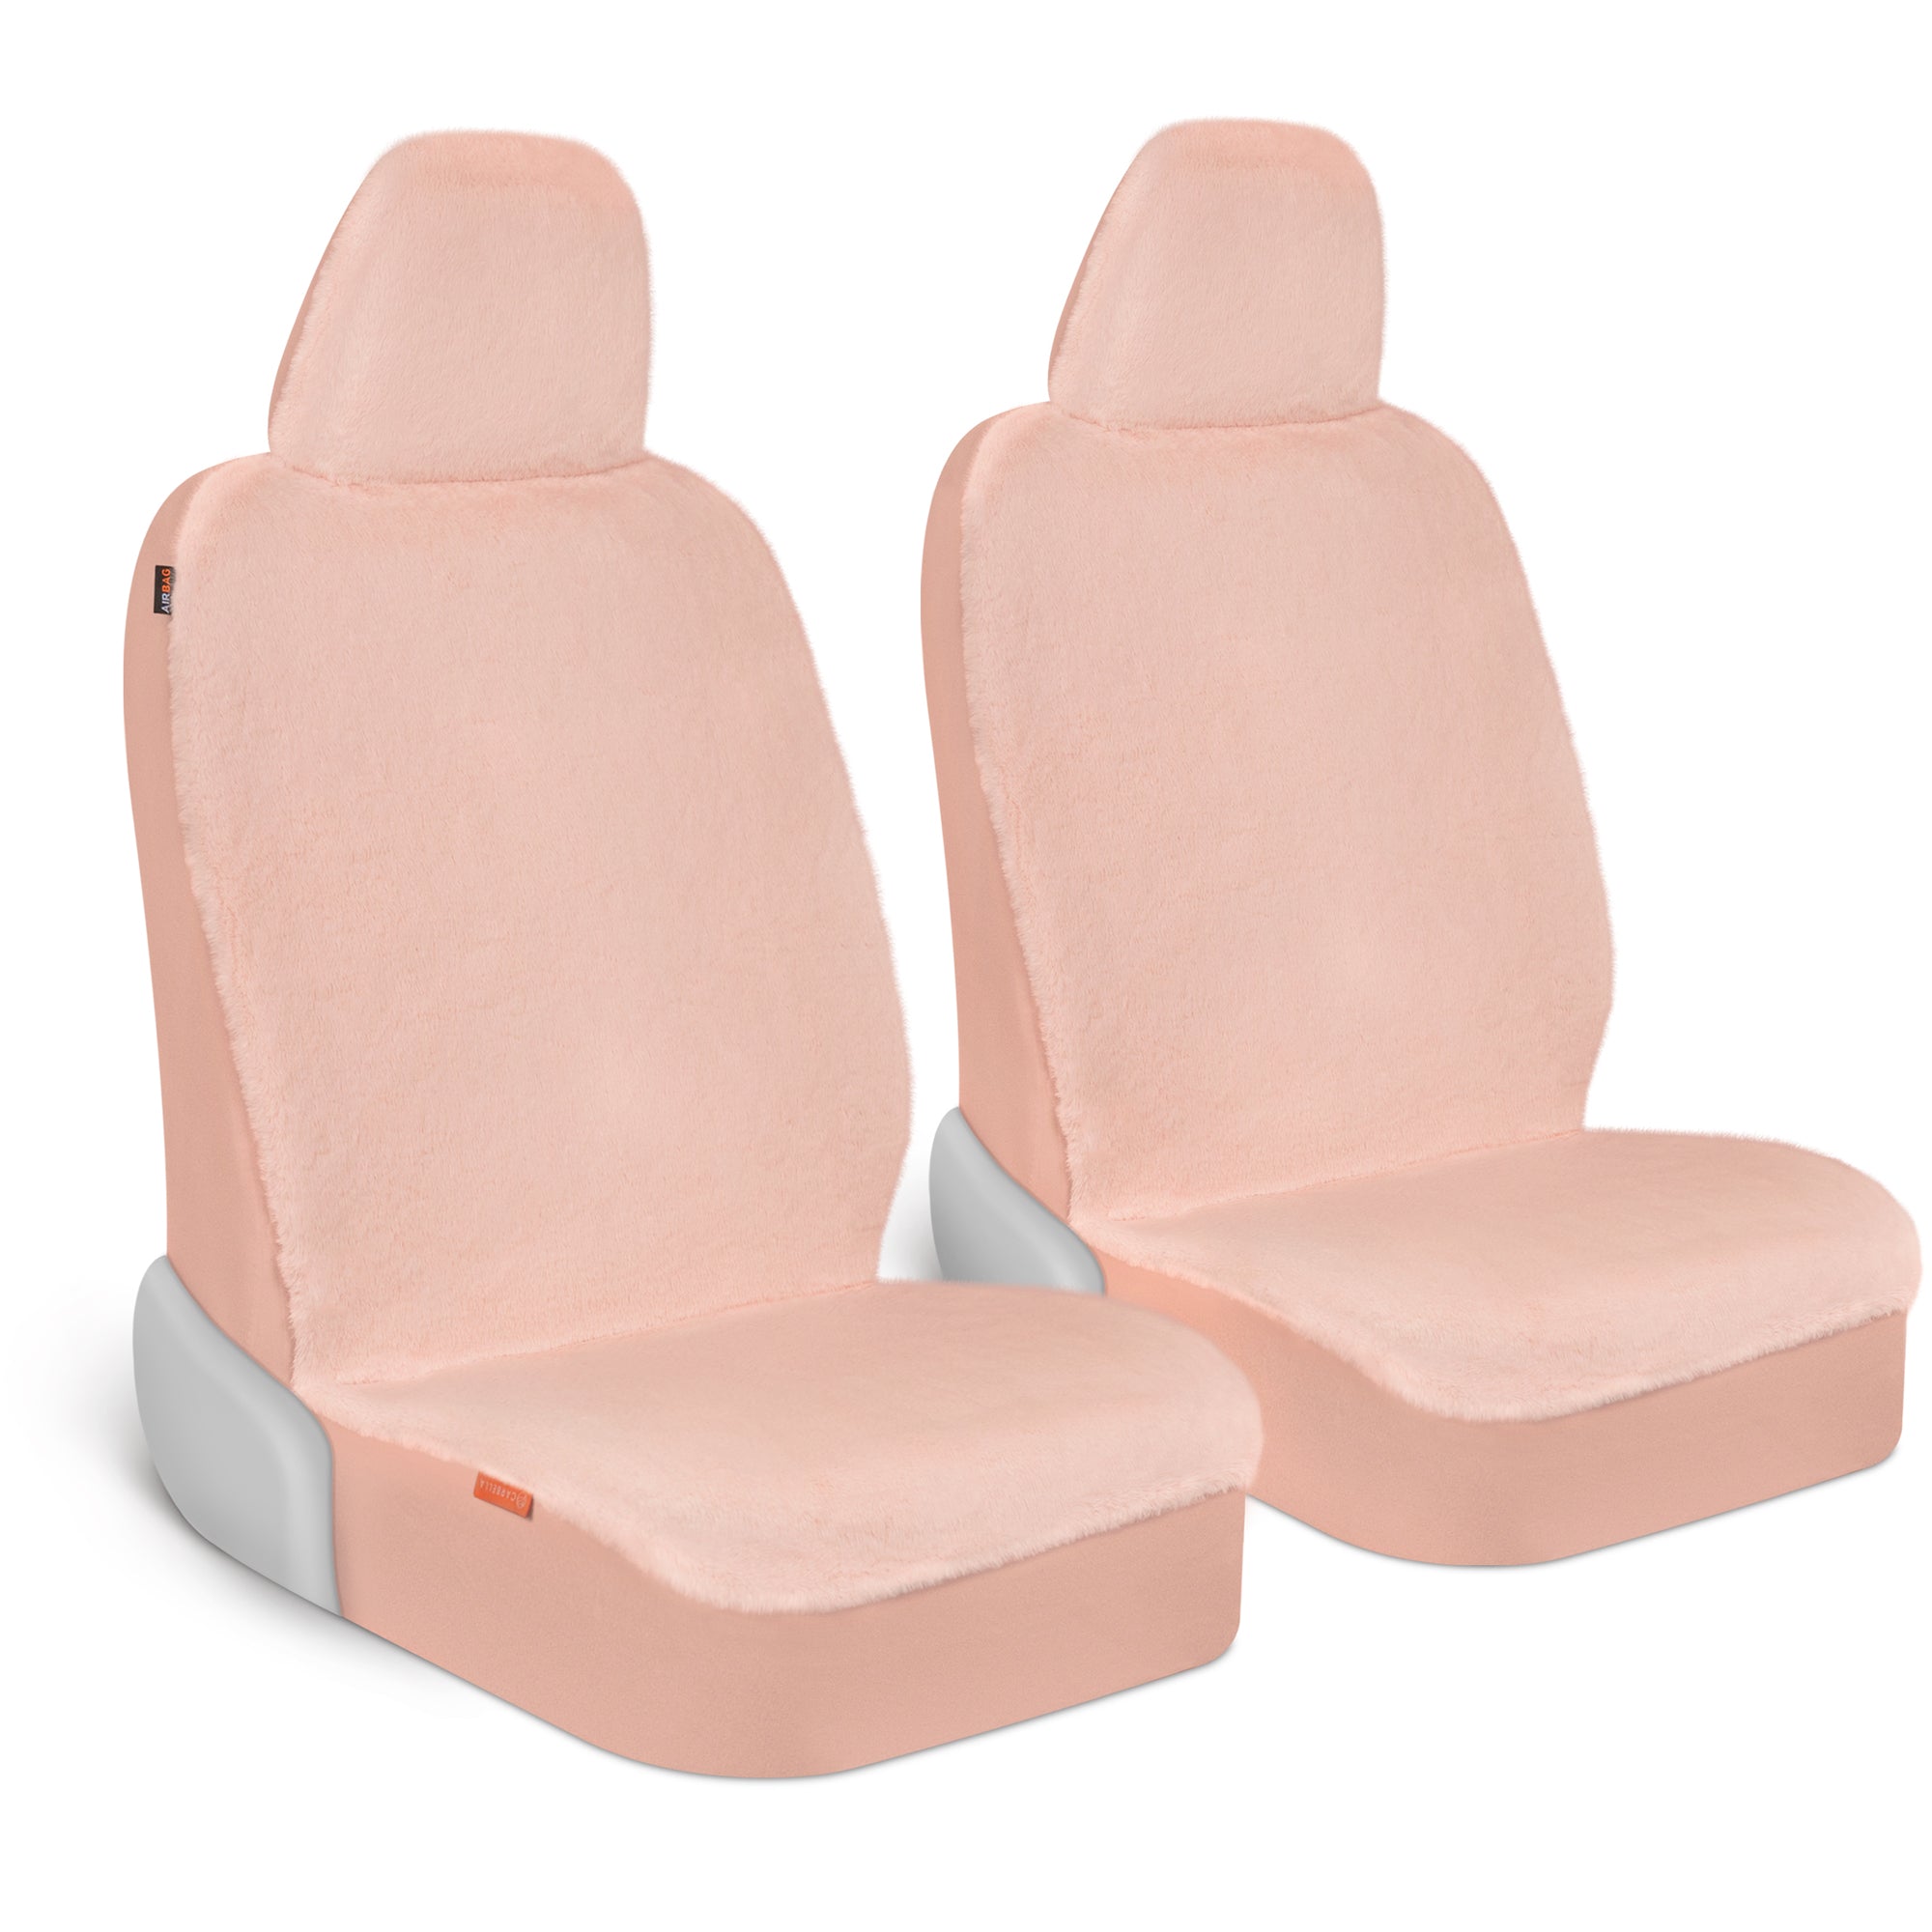 Carbella Sheepskin Car Seat Covers for Women, 2-Pack Faux Fur Car Seat Covers Front Seats Only, Cute Automotive Seat Covers For Cars for Women, Car Accessories for Women (Soft Pink) - Soft Pink:#FFC7C9